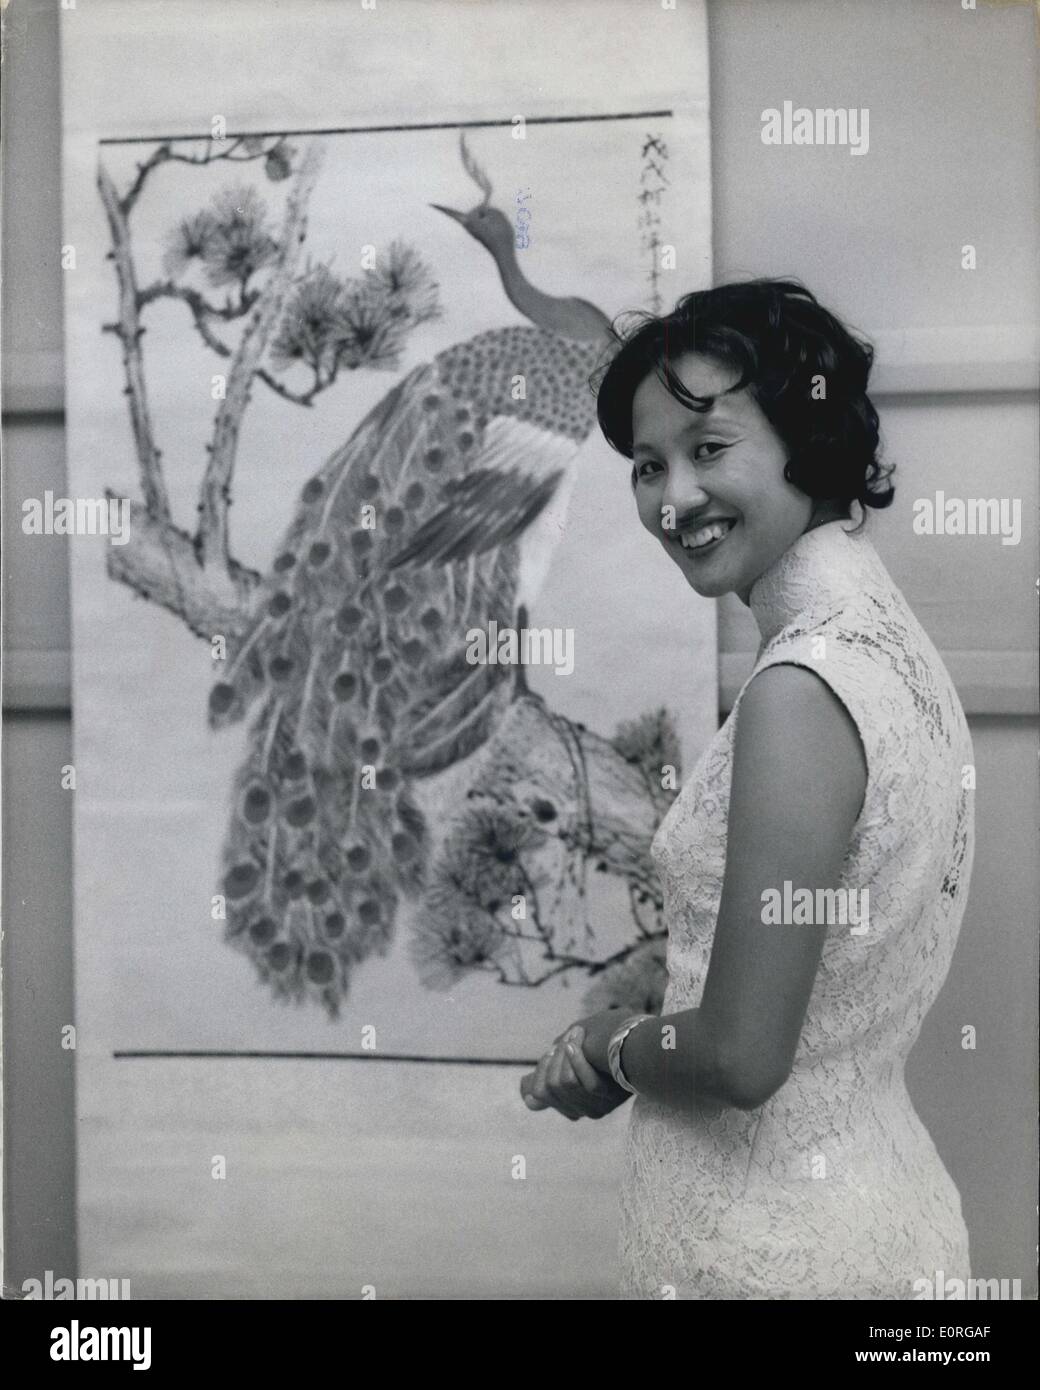 Jul. 00, 1959 - Chinese Air Hostess Holds Exhibition Of Her Painting In London: An exhibition of paintings by B.O.A.C. air hostess Miss Theresa Wai Ching Kwa from Hong Kong-opened this morning at the Commonwealth Institute, South Kensington. The work of Theresa as an artist is highly regarded in Hong Kong. She employs traditional Chinese techniques and among her subjects are bamboo, chrysanthemums; pine trees, birds and fish. Photo shows. Miss Theresa Wai Ching Kwa with some of her paintings at the exhibition this morning. Stock Photo